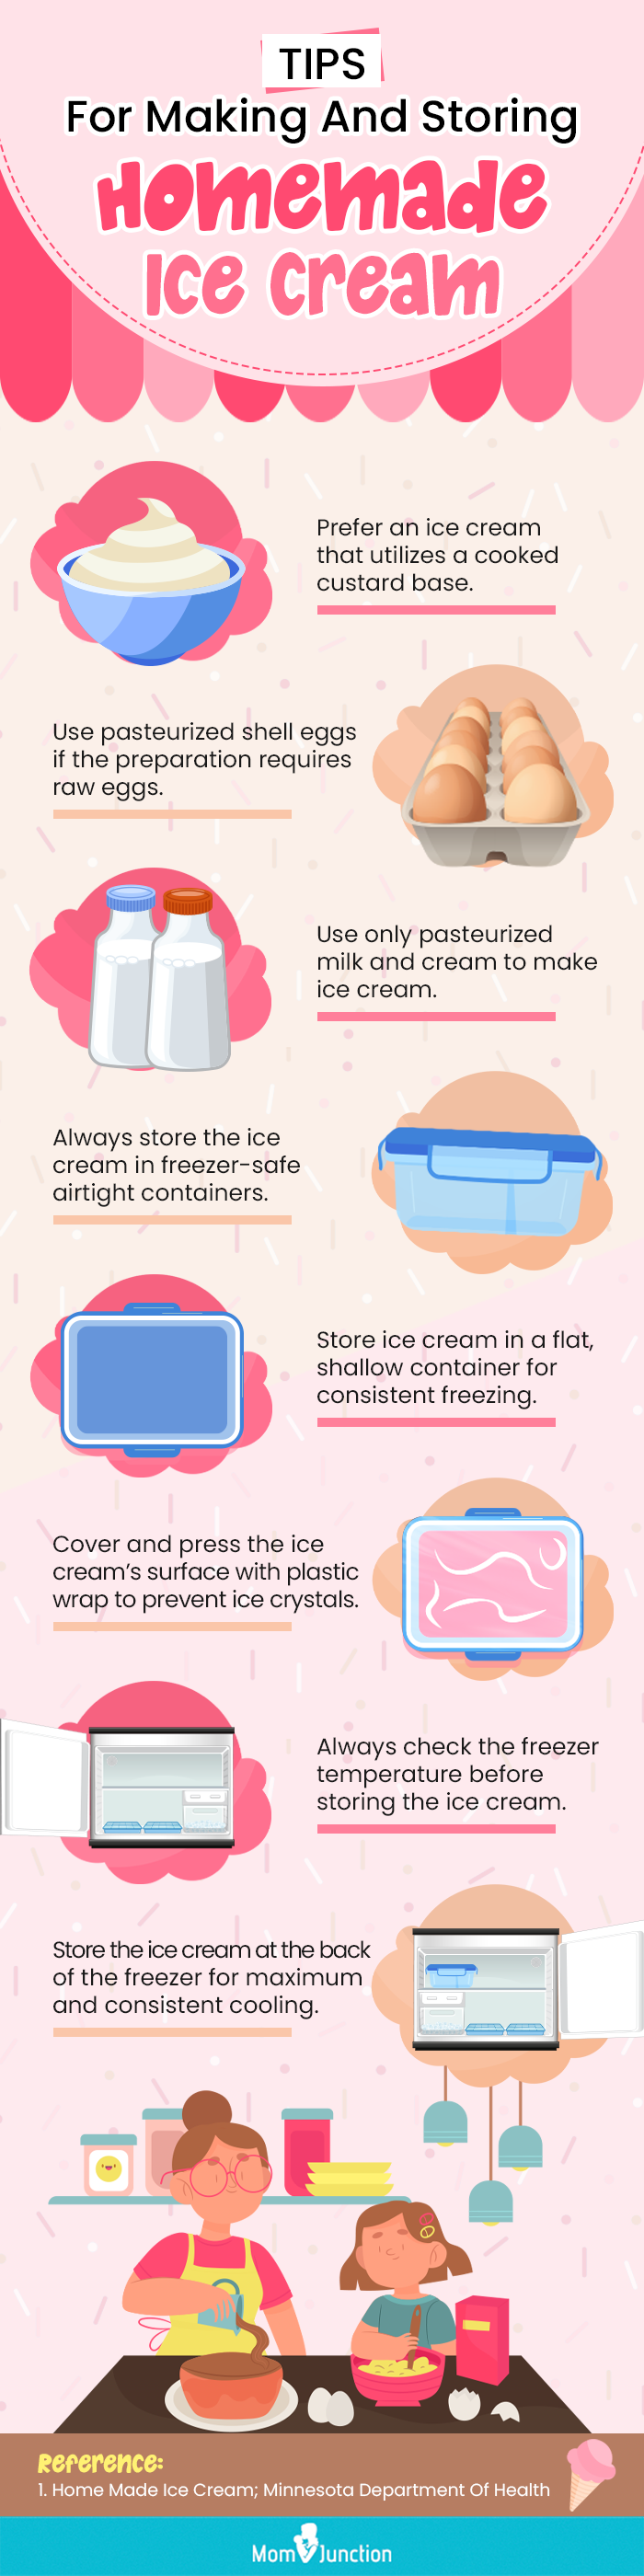 https://cdn2.momjunction.com/wp-content/uploads/2021/03/Tips-For-Making-And-Storing-Homemade-Ice-Cream.png